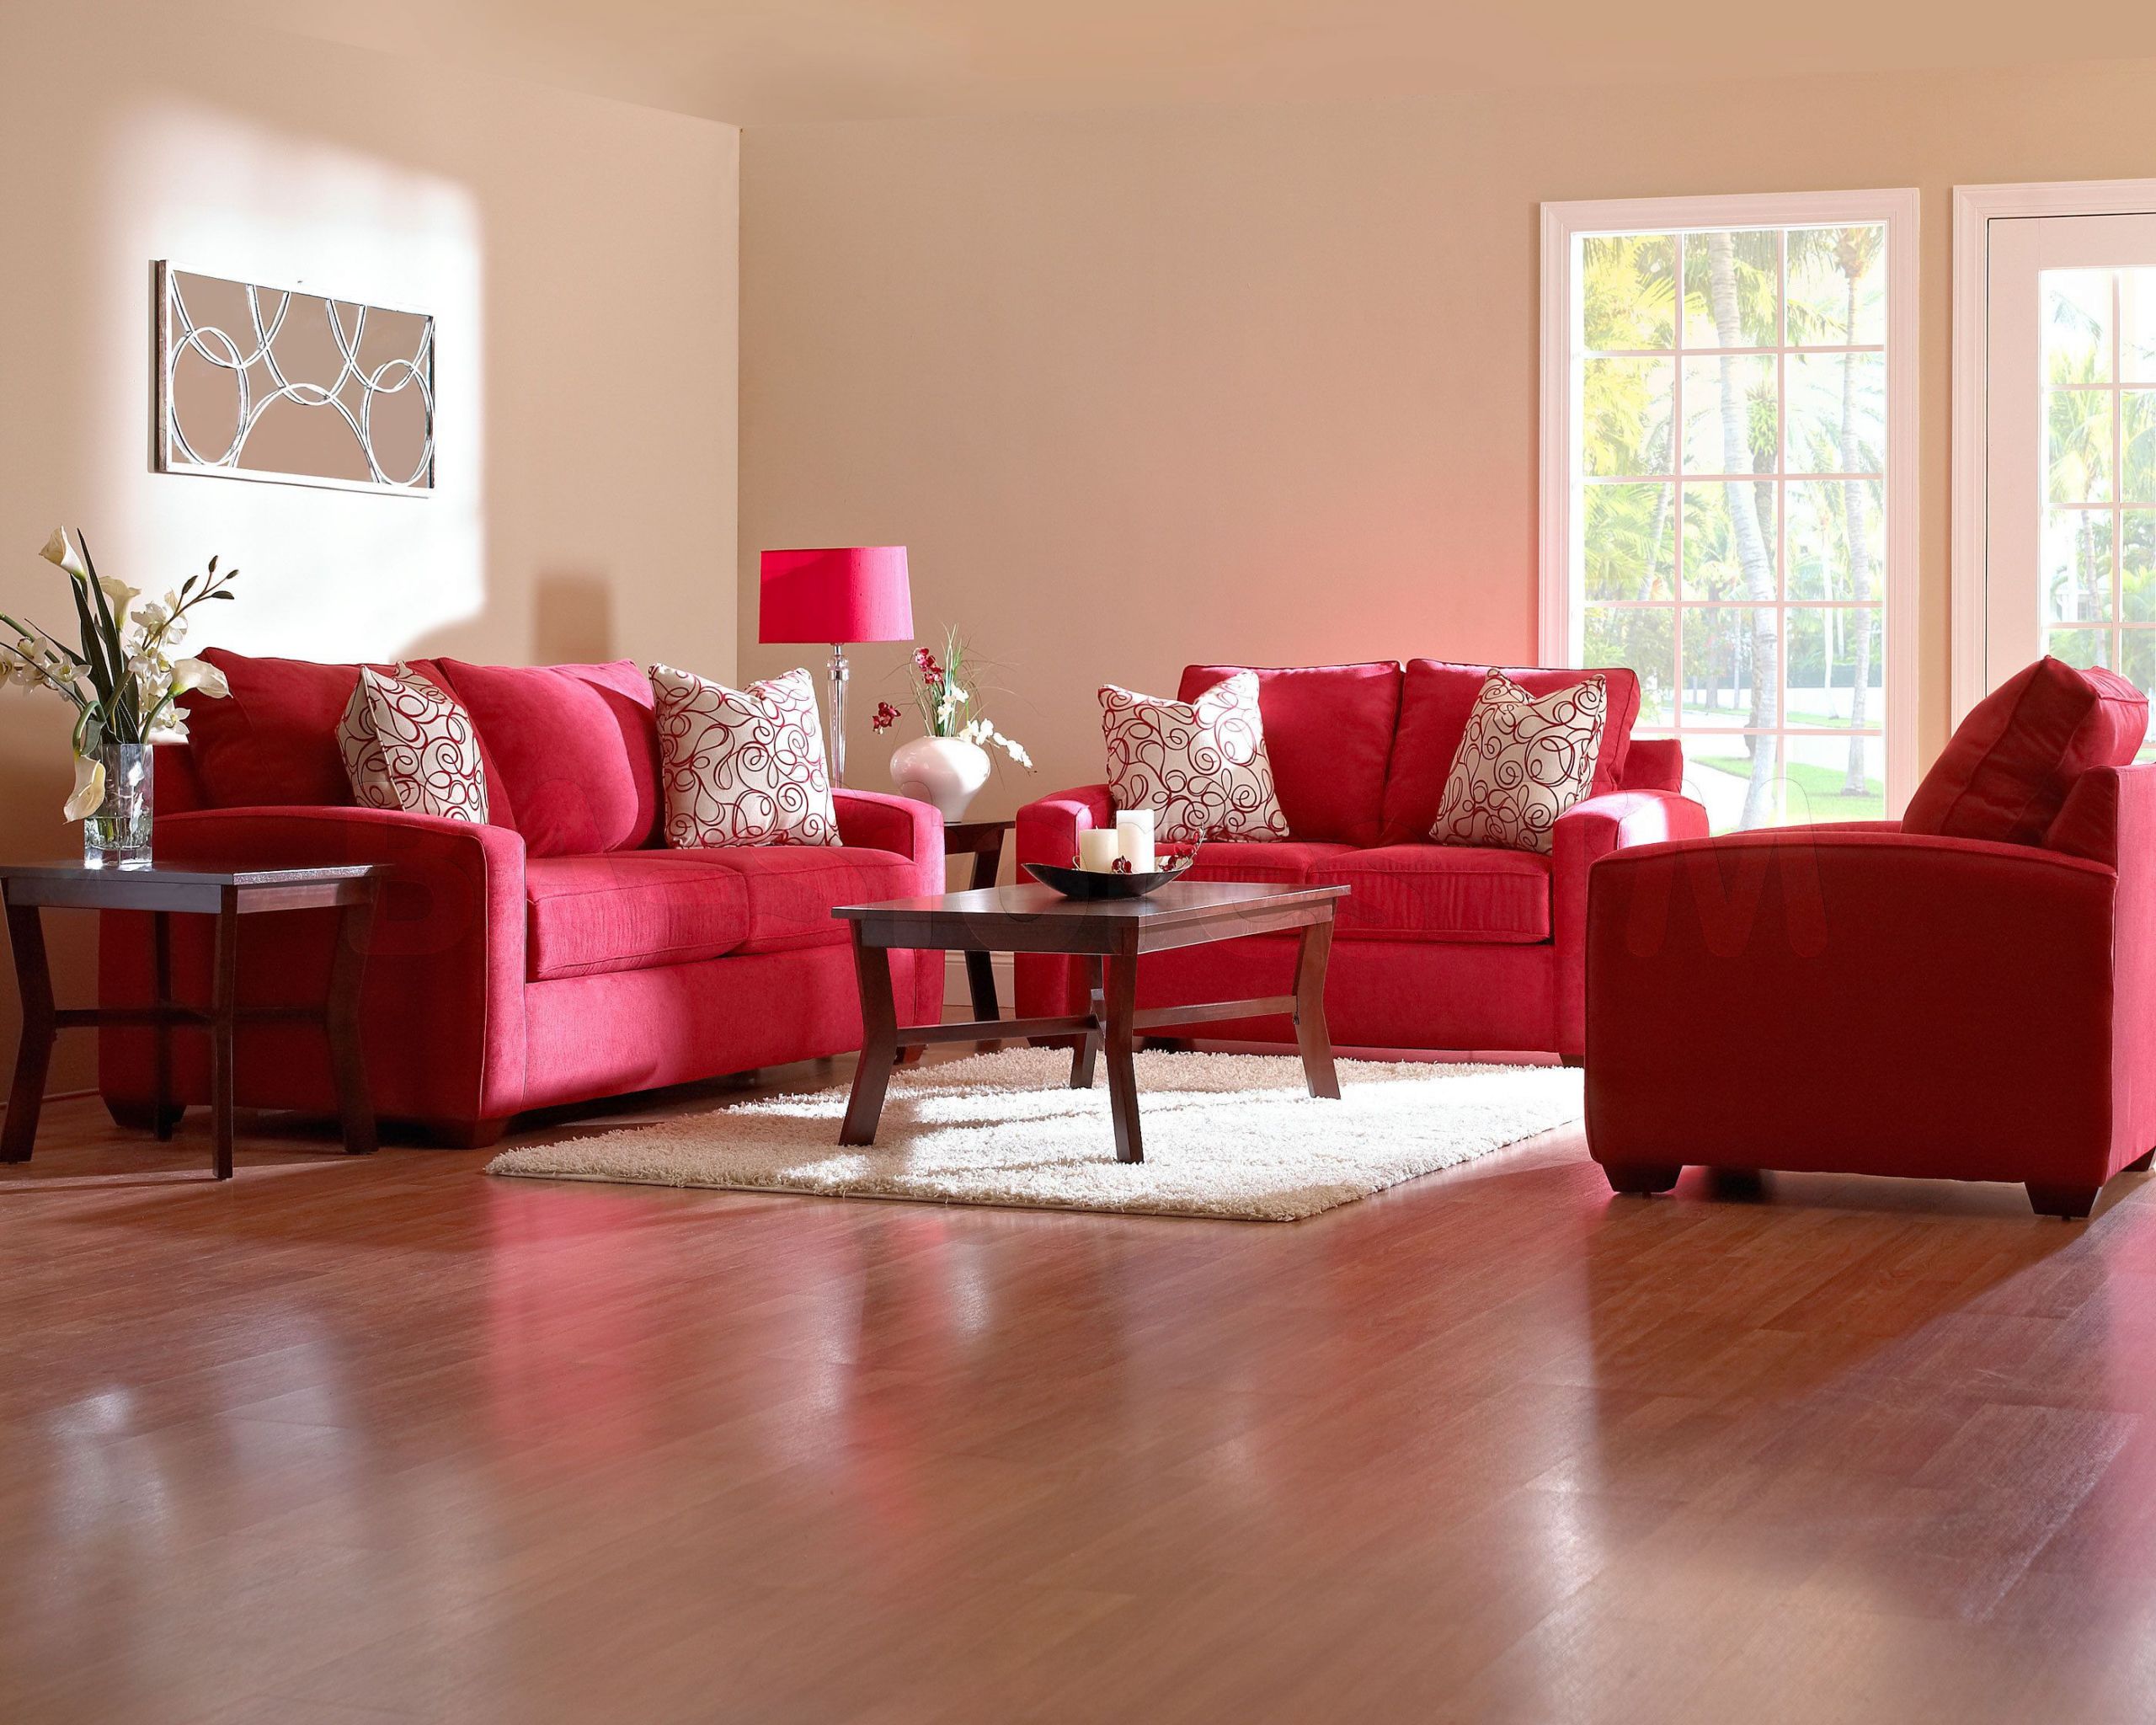 Red Sofa Living Room Ideas
 red furniture decorating ideas